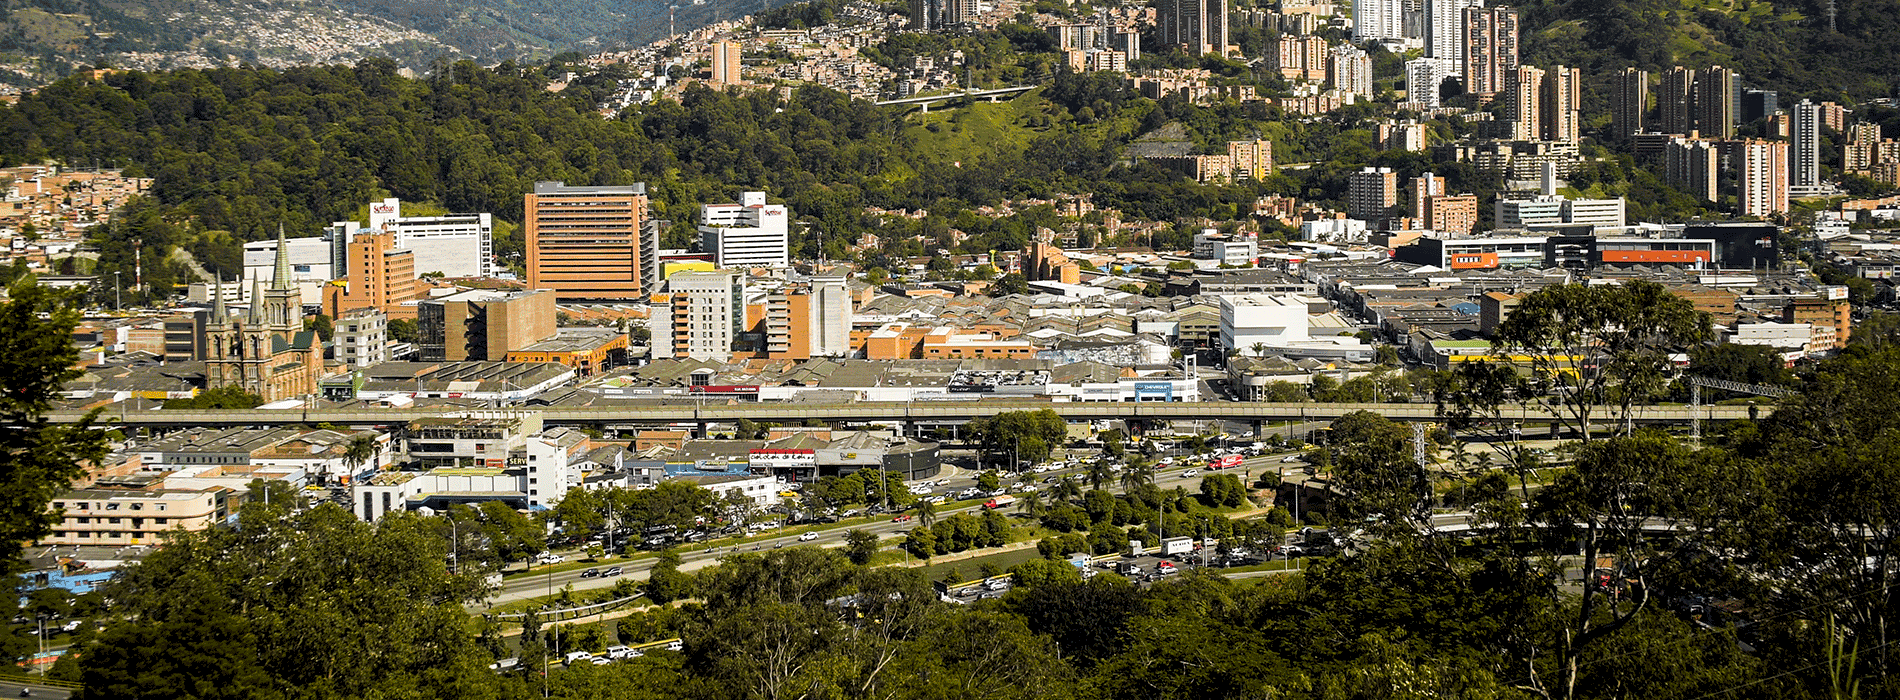 Medellín, a city open to business, technology, and foreign investment